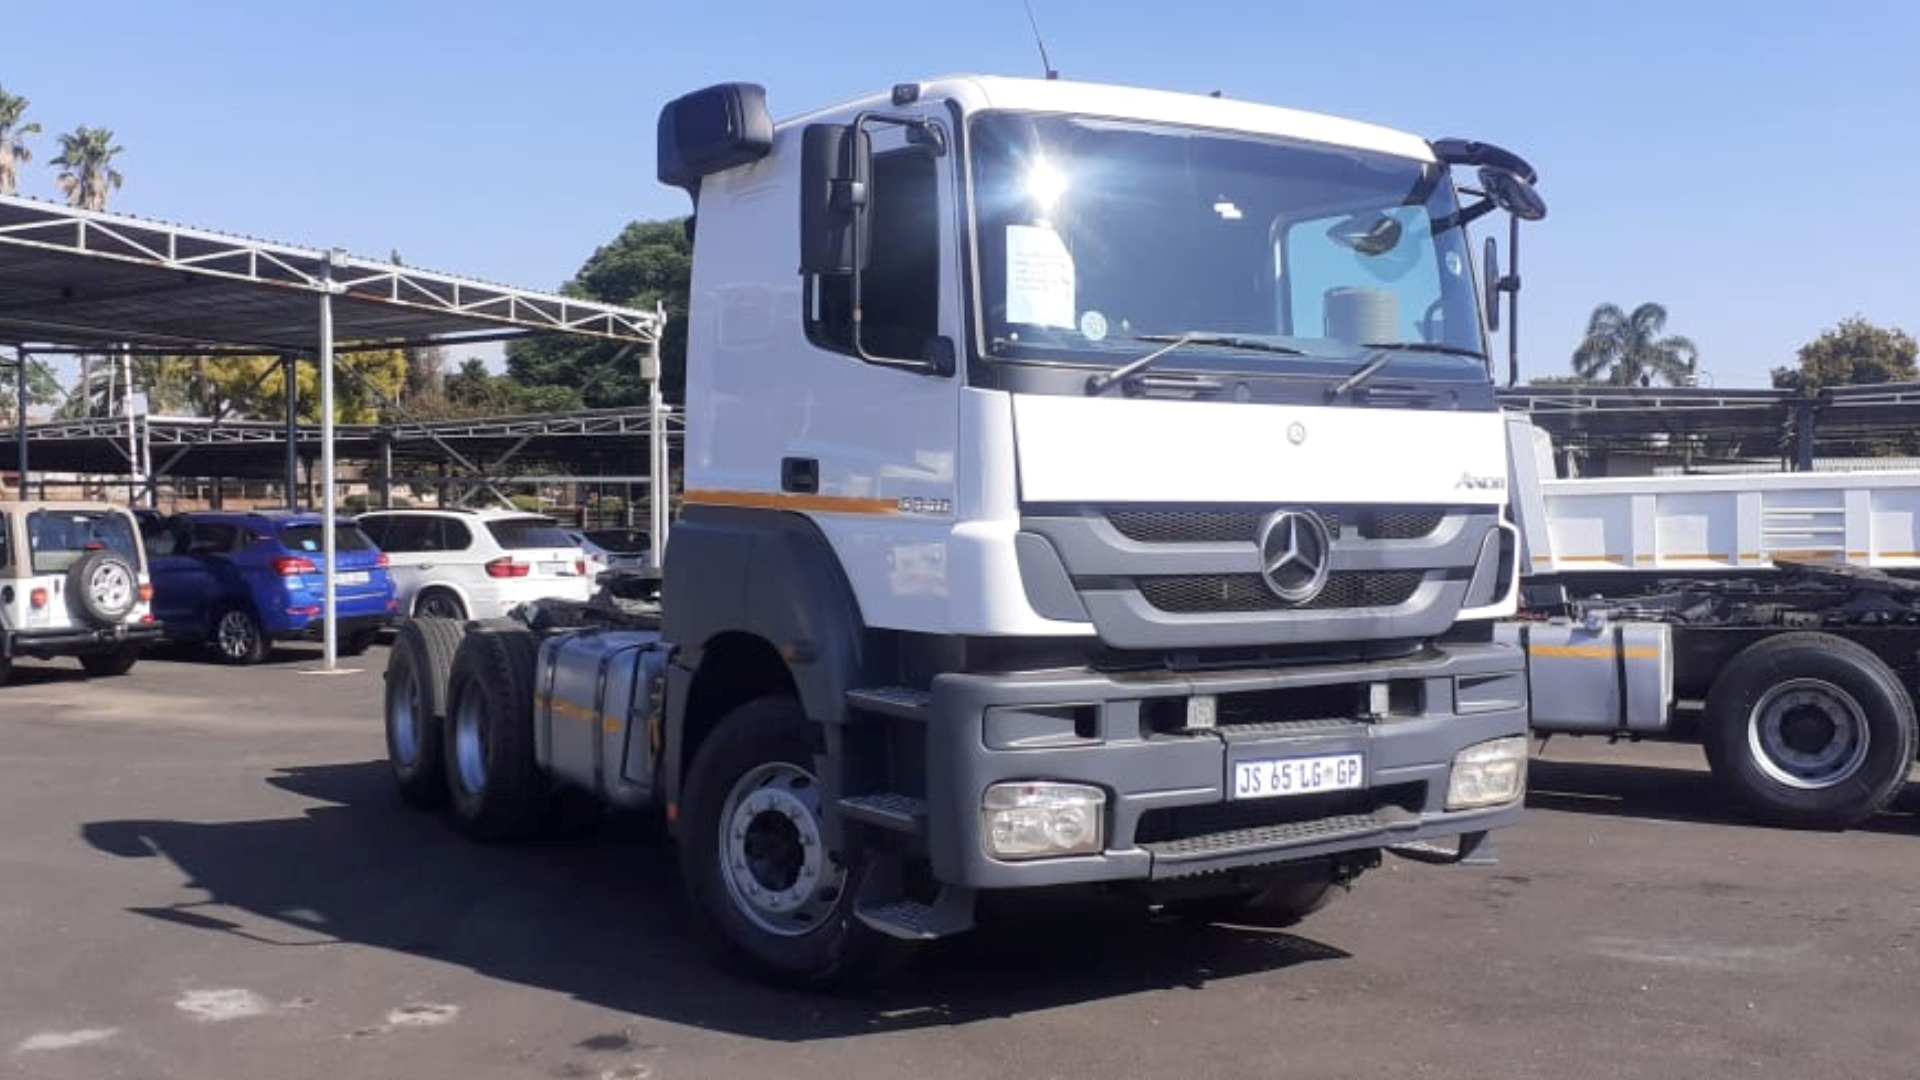 Mercedes Benz Truck tractors Double axle Axor 3340 2017 for sale by MT Car and Truck Auctioneers | Truck & Trailer Marketplace